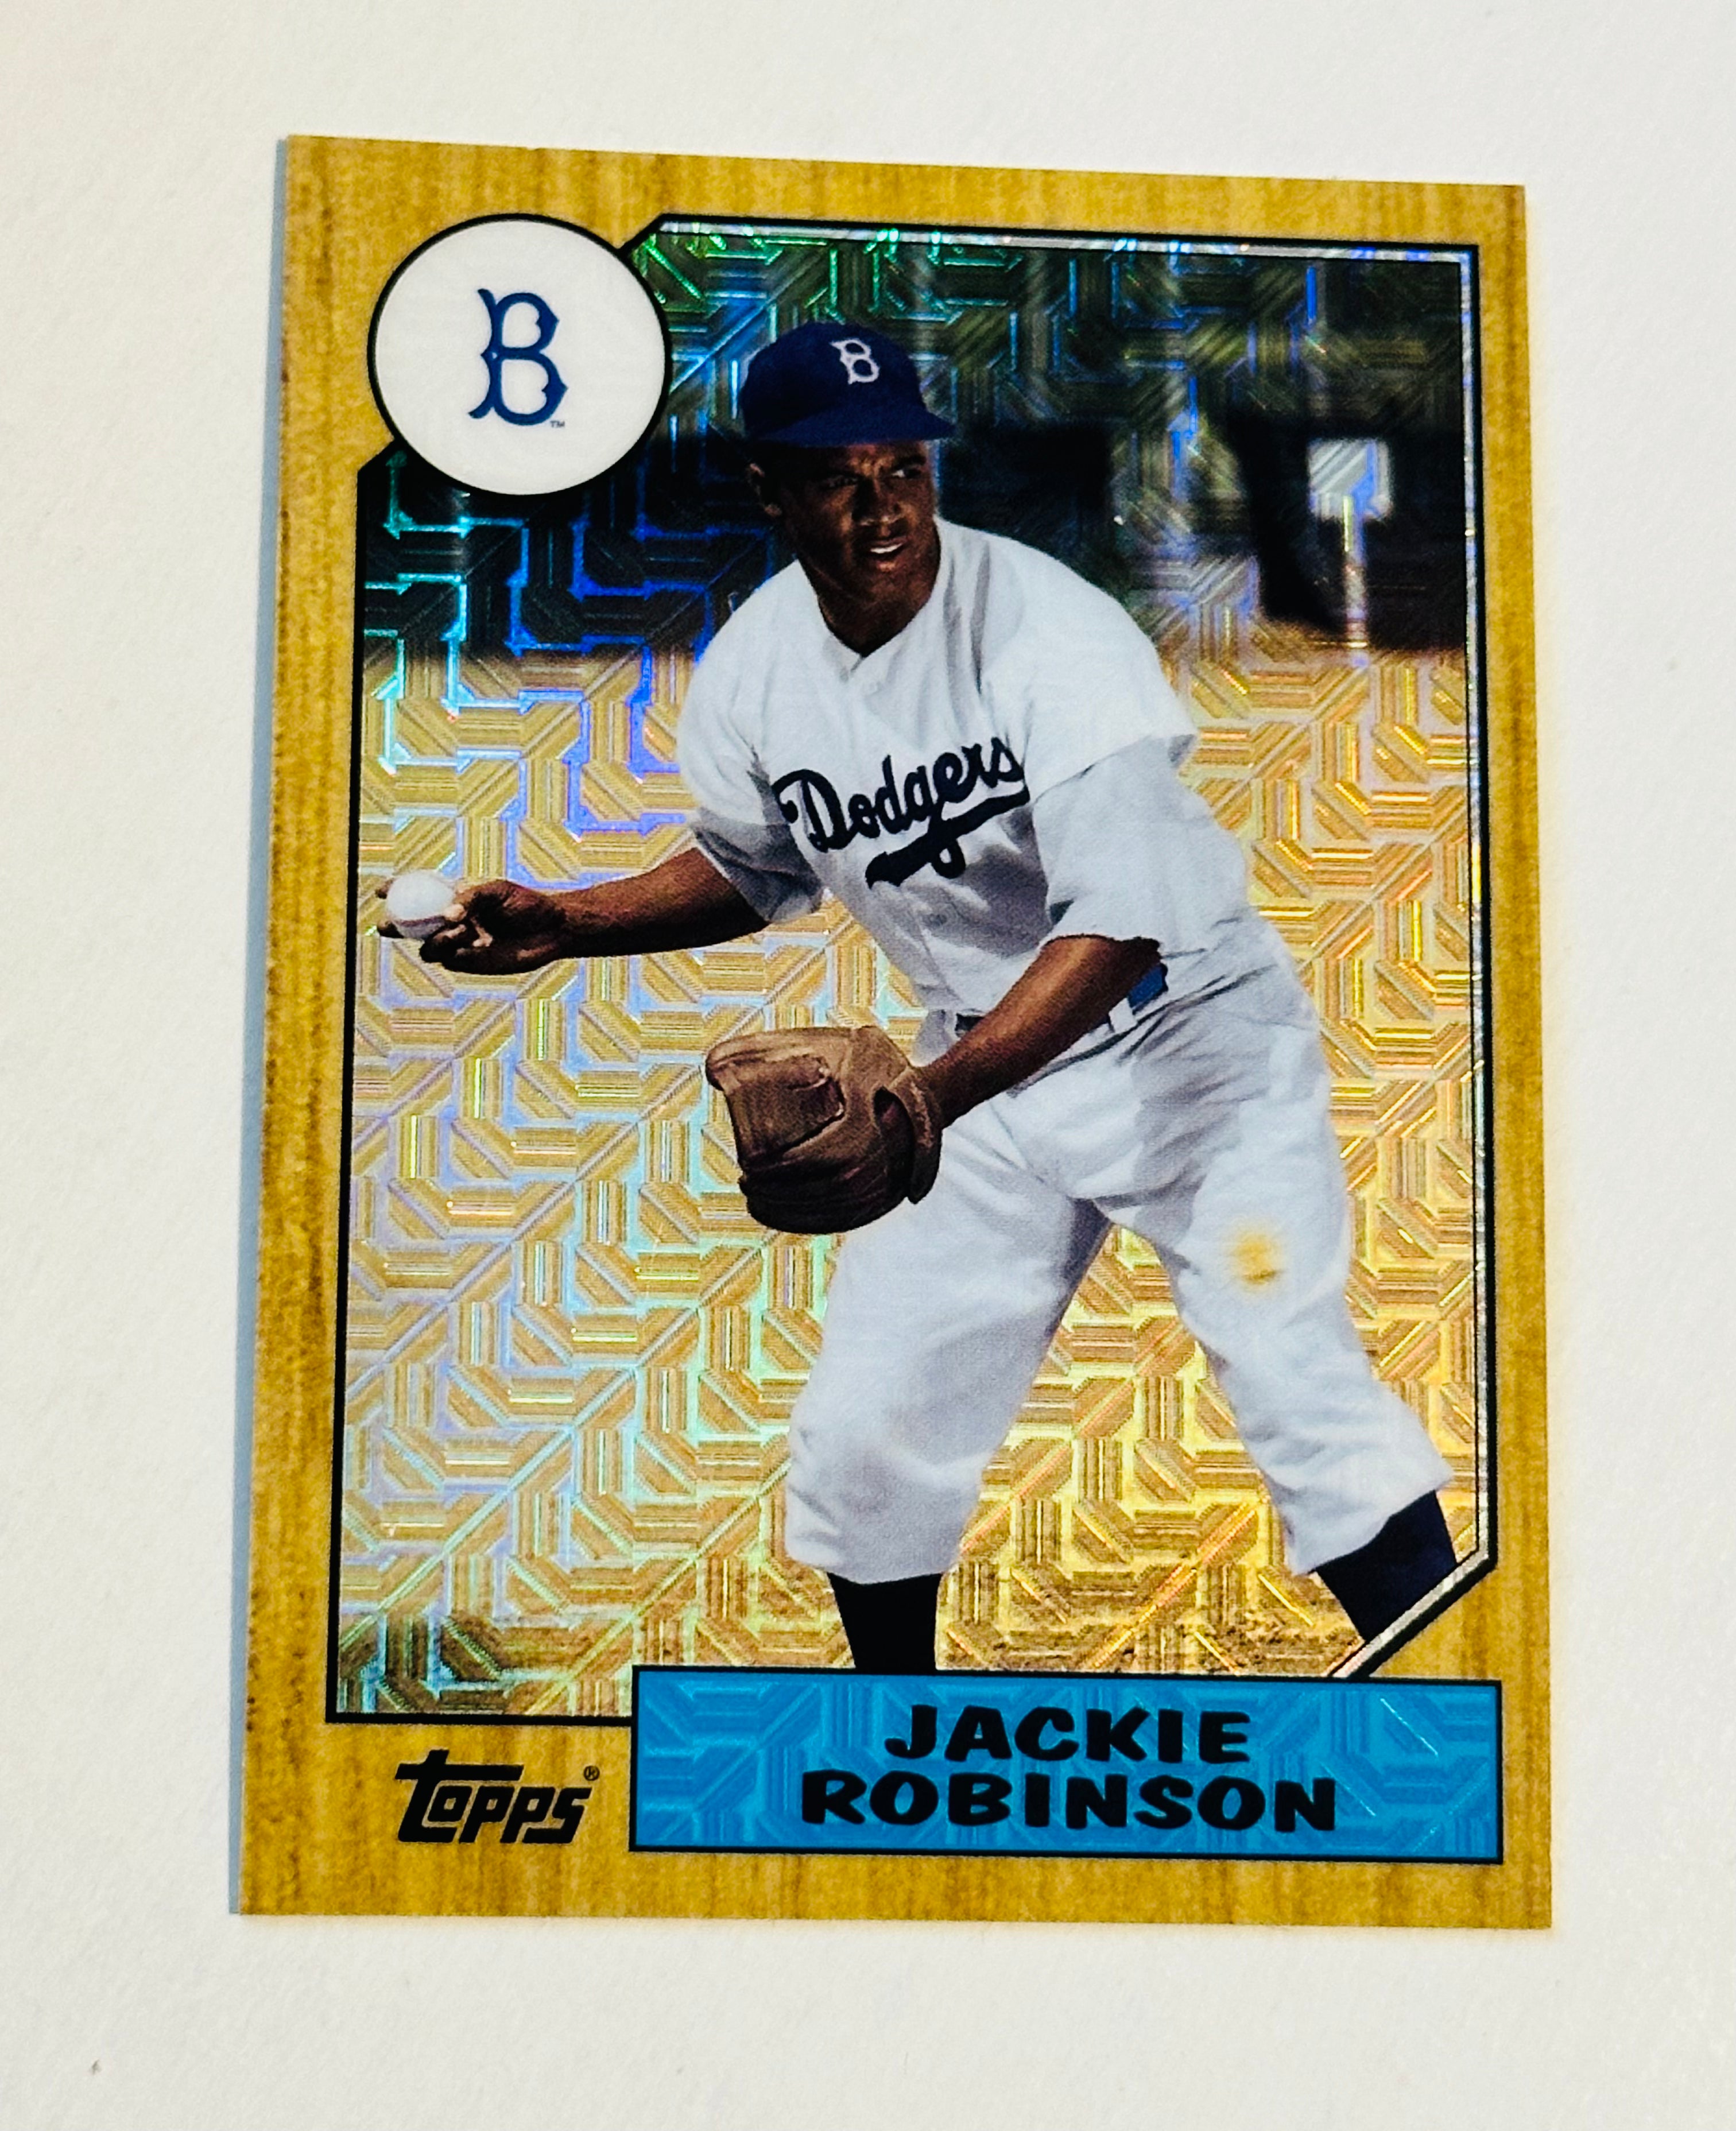 Jackie Robinson rare Topps foil limited issued baseball insert card 2017